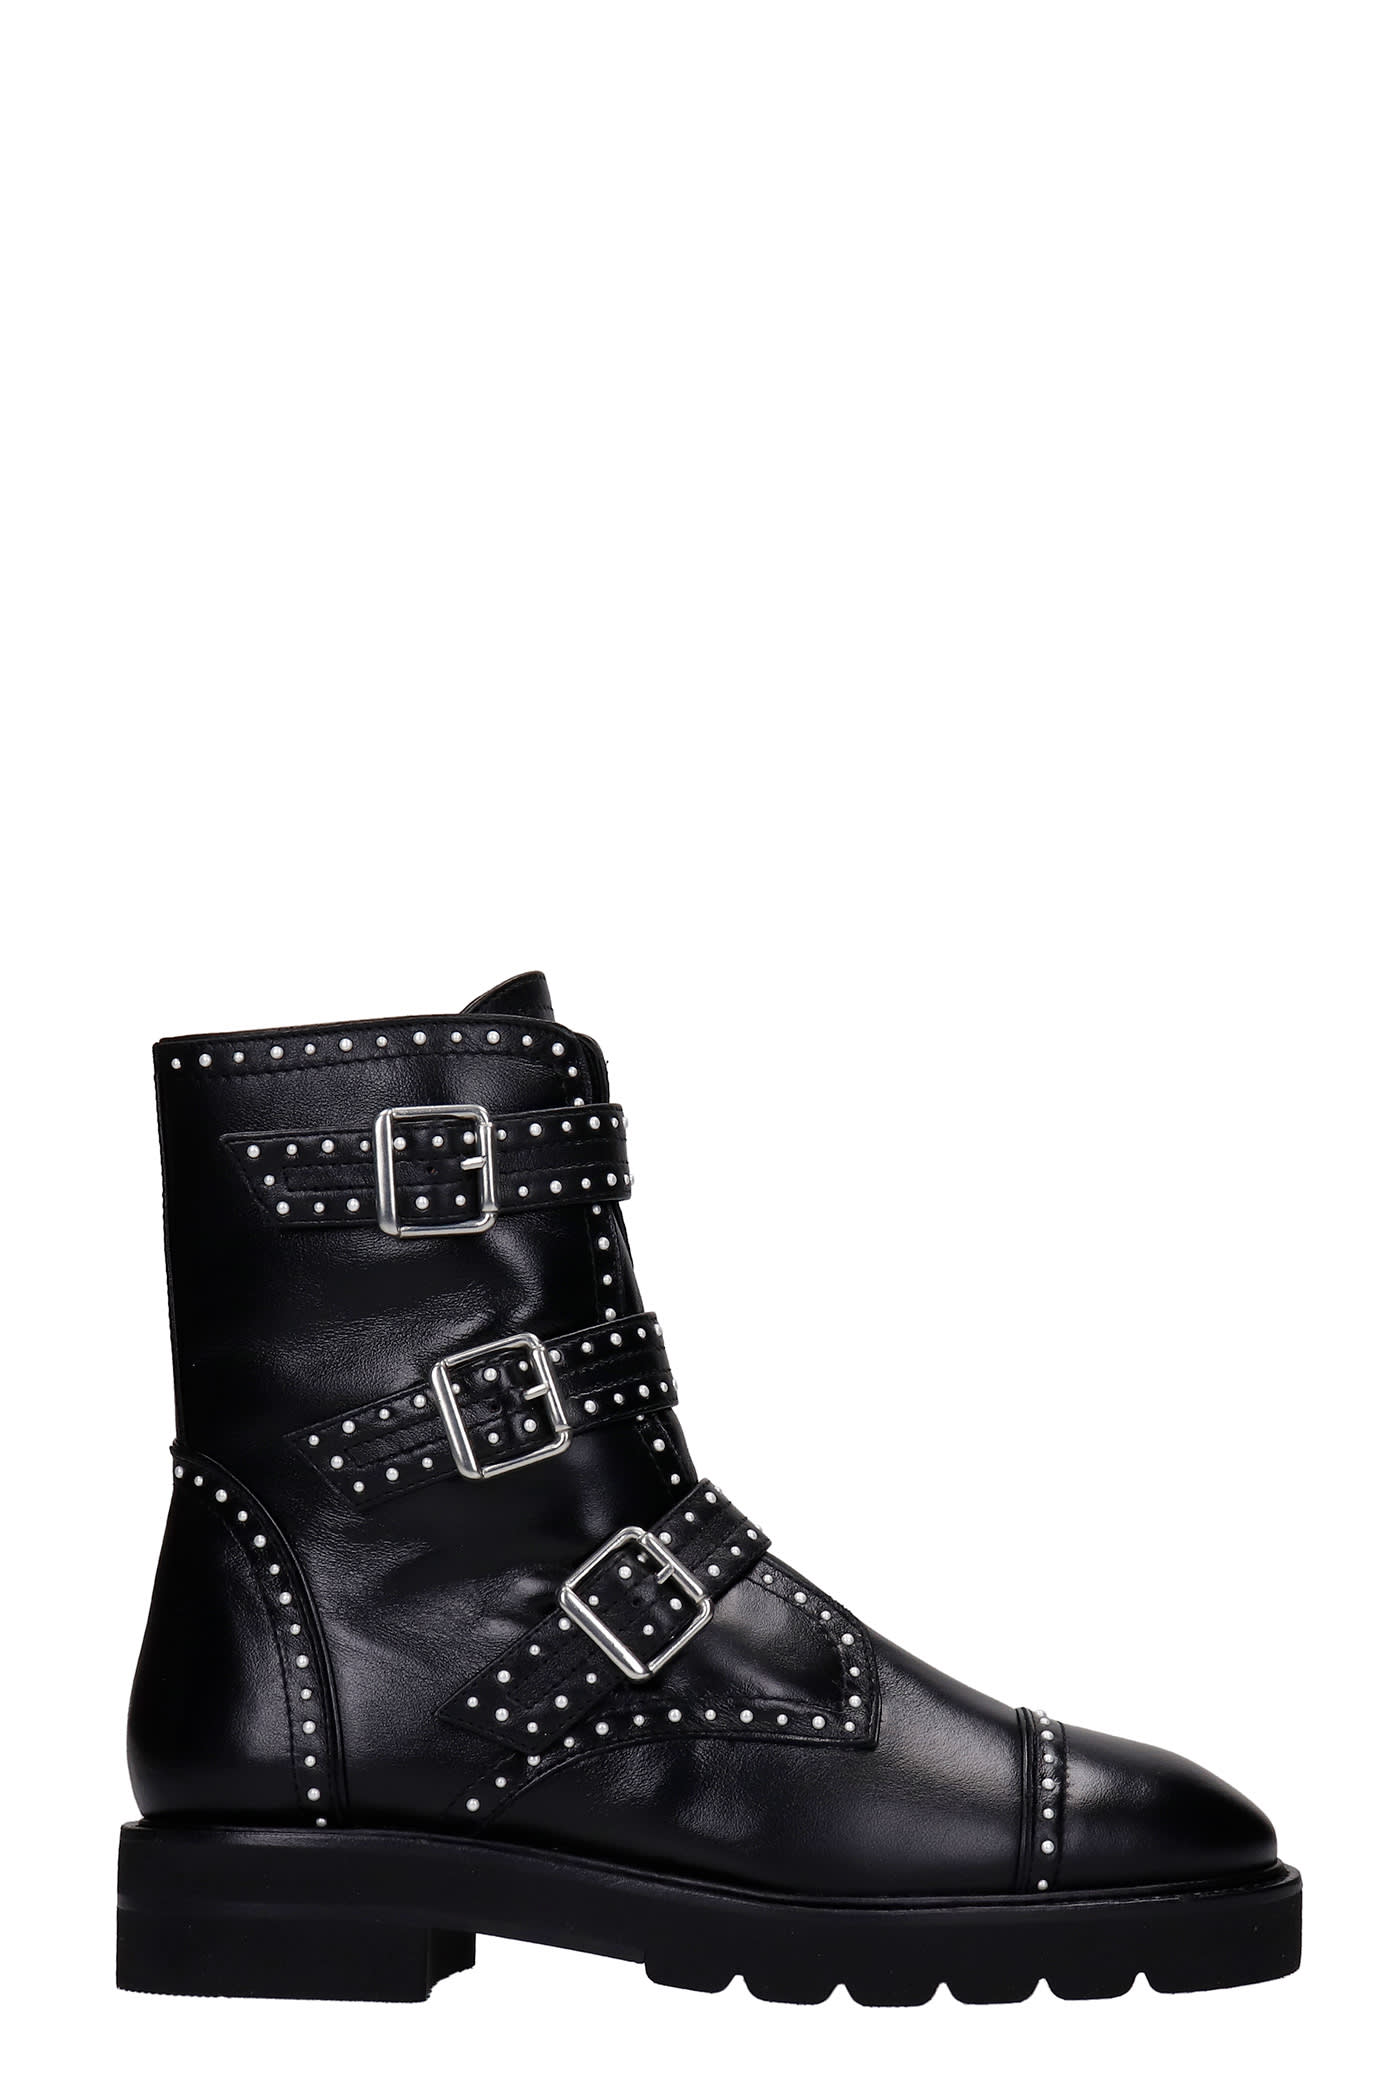 Buy Stuart Weitzman Jesse Combat Boots In Black Leather online, shop Stuart Weitzman shoes with free shipping